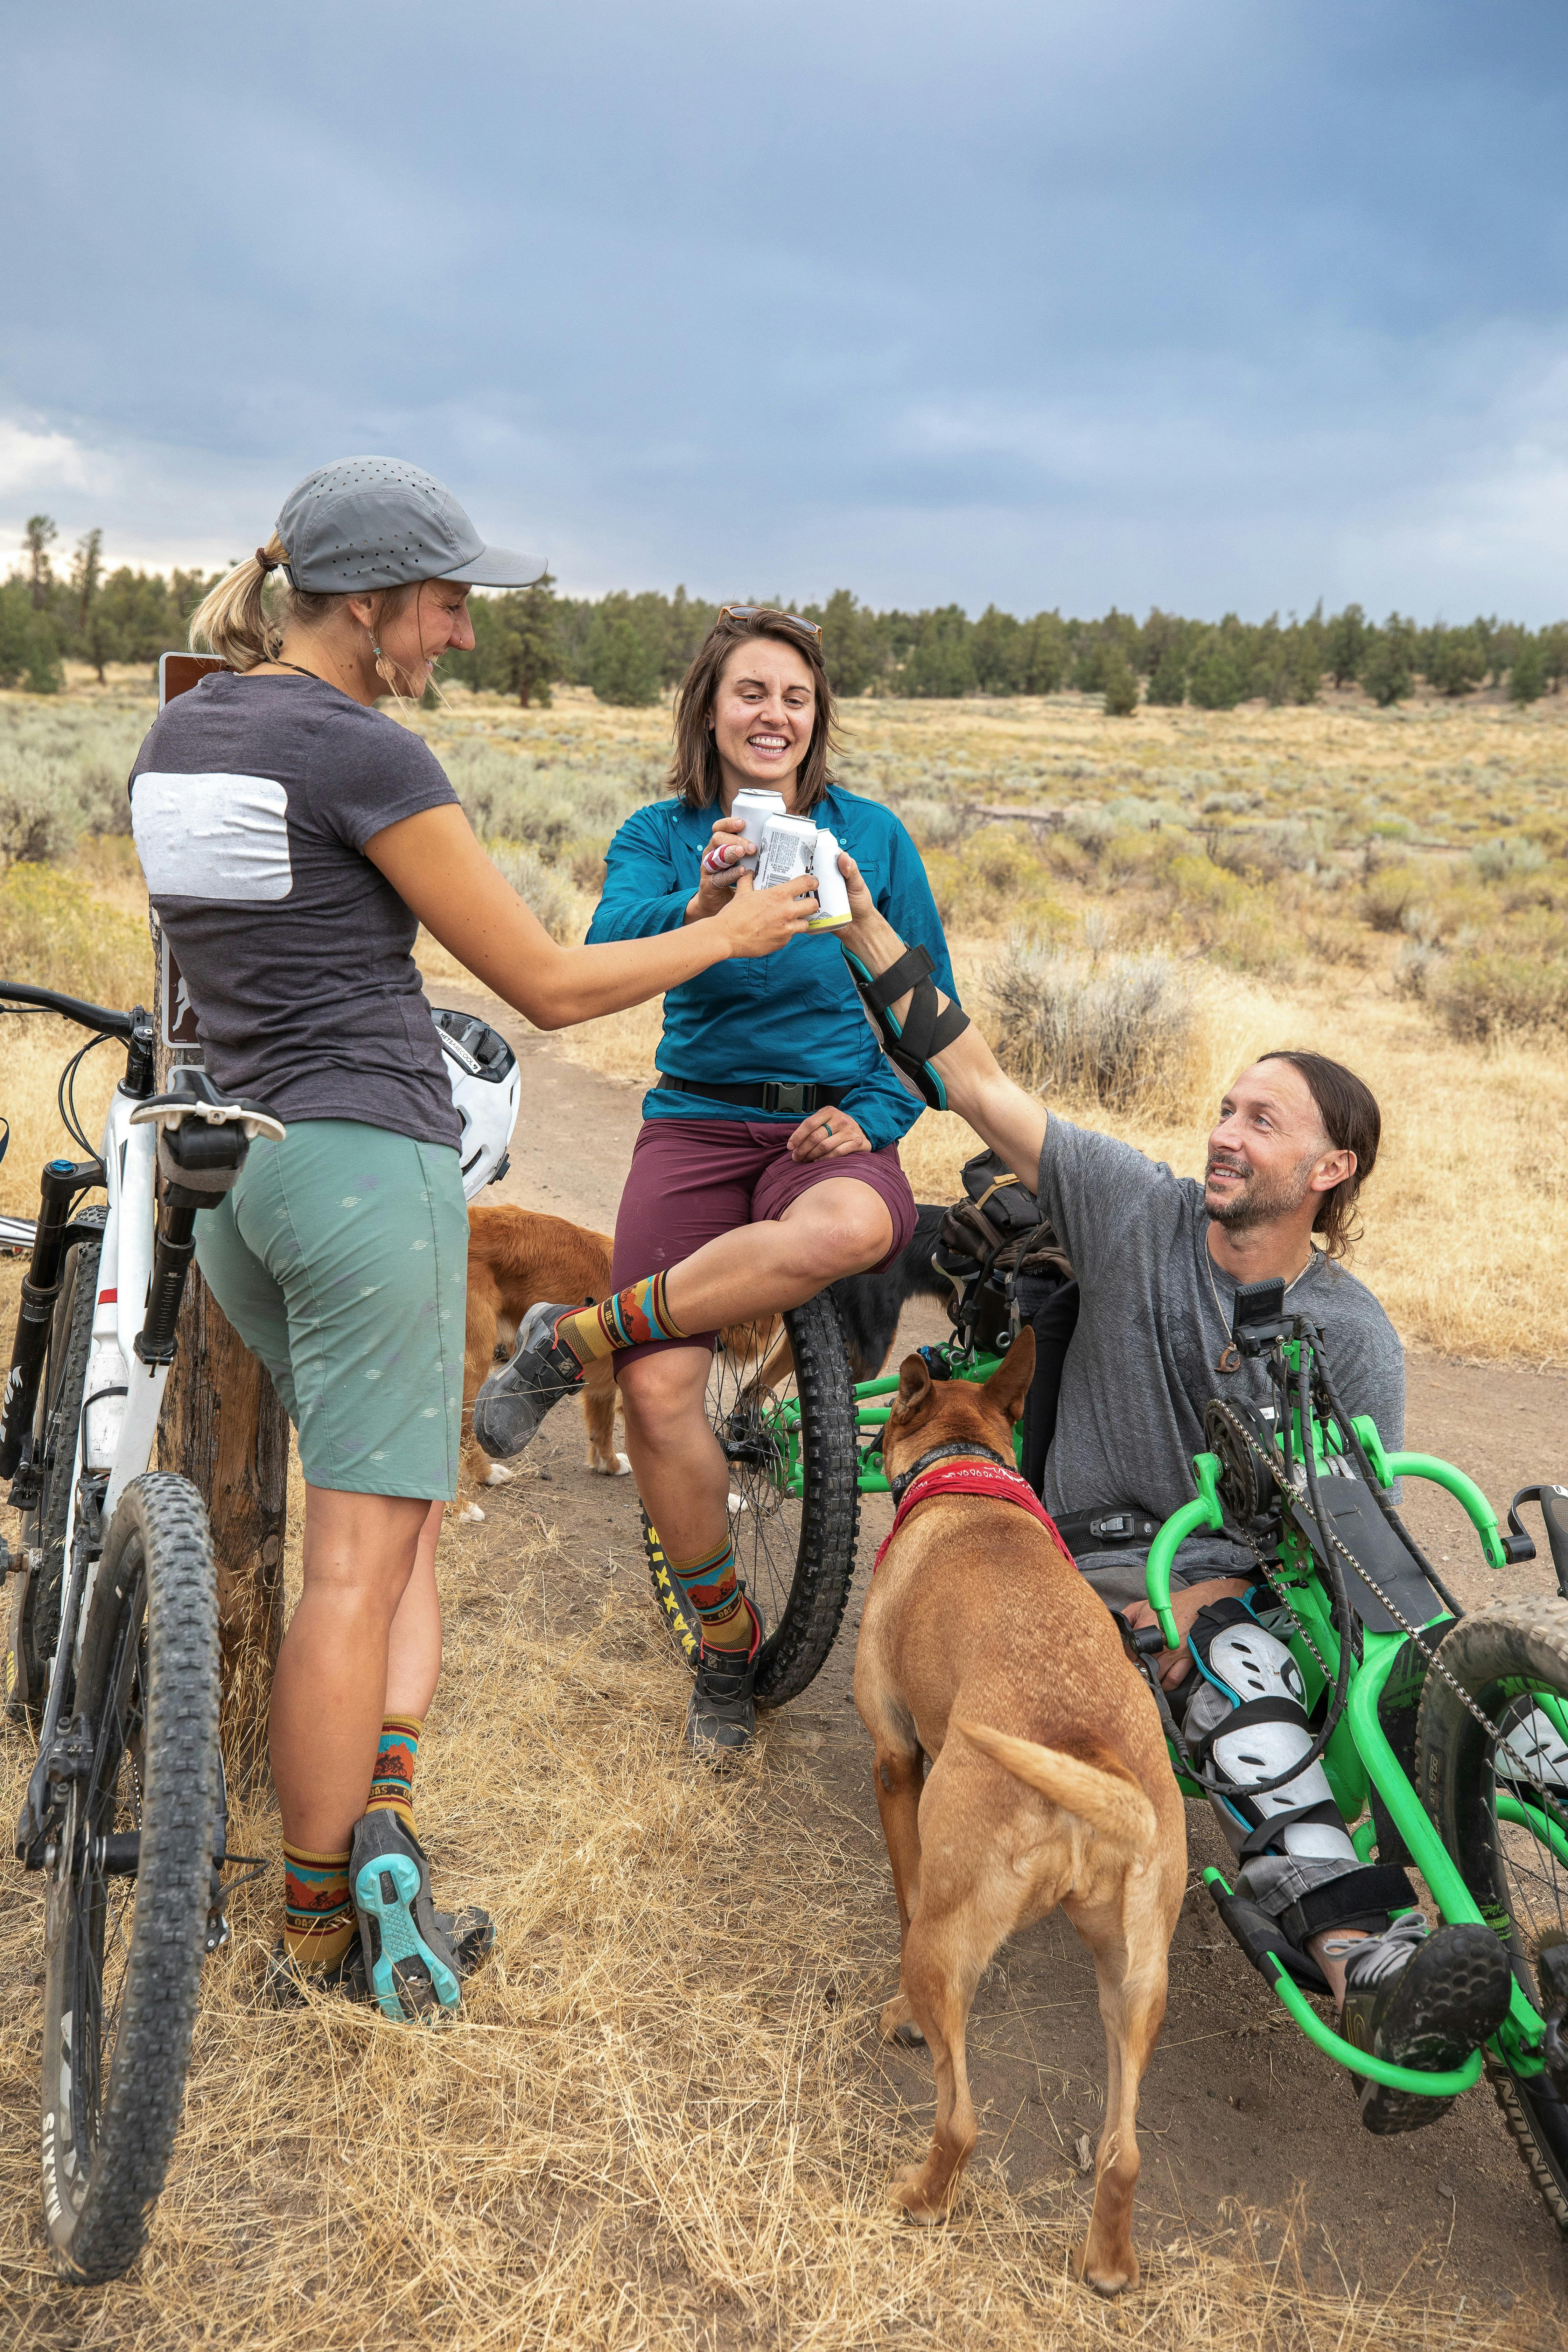 People share a drink after a long ride 